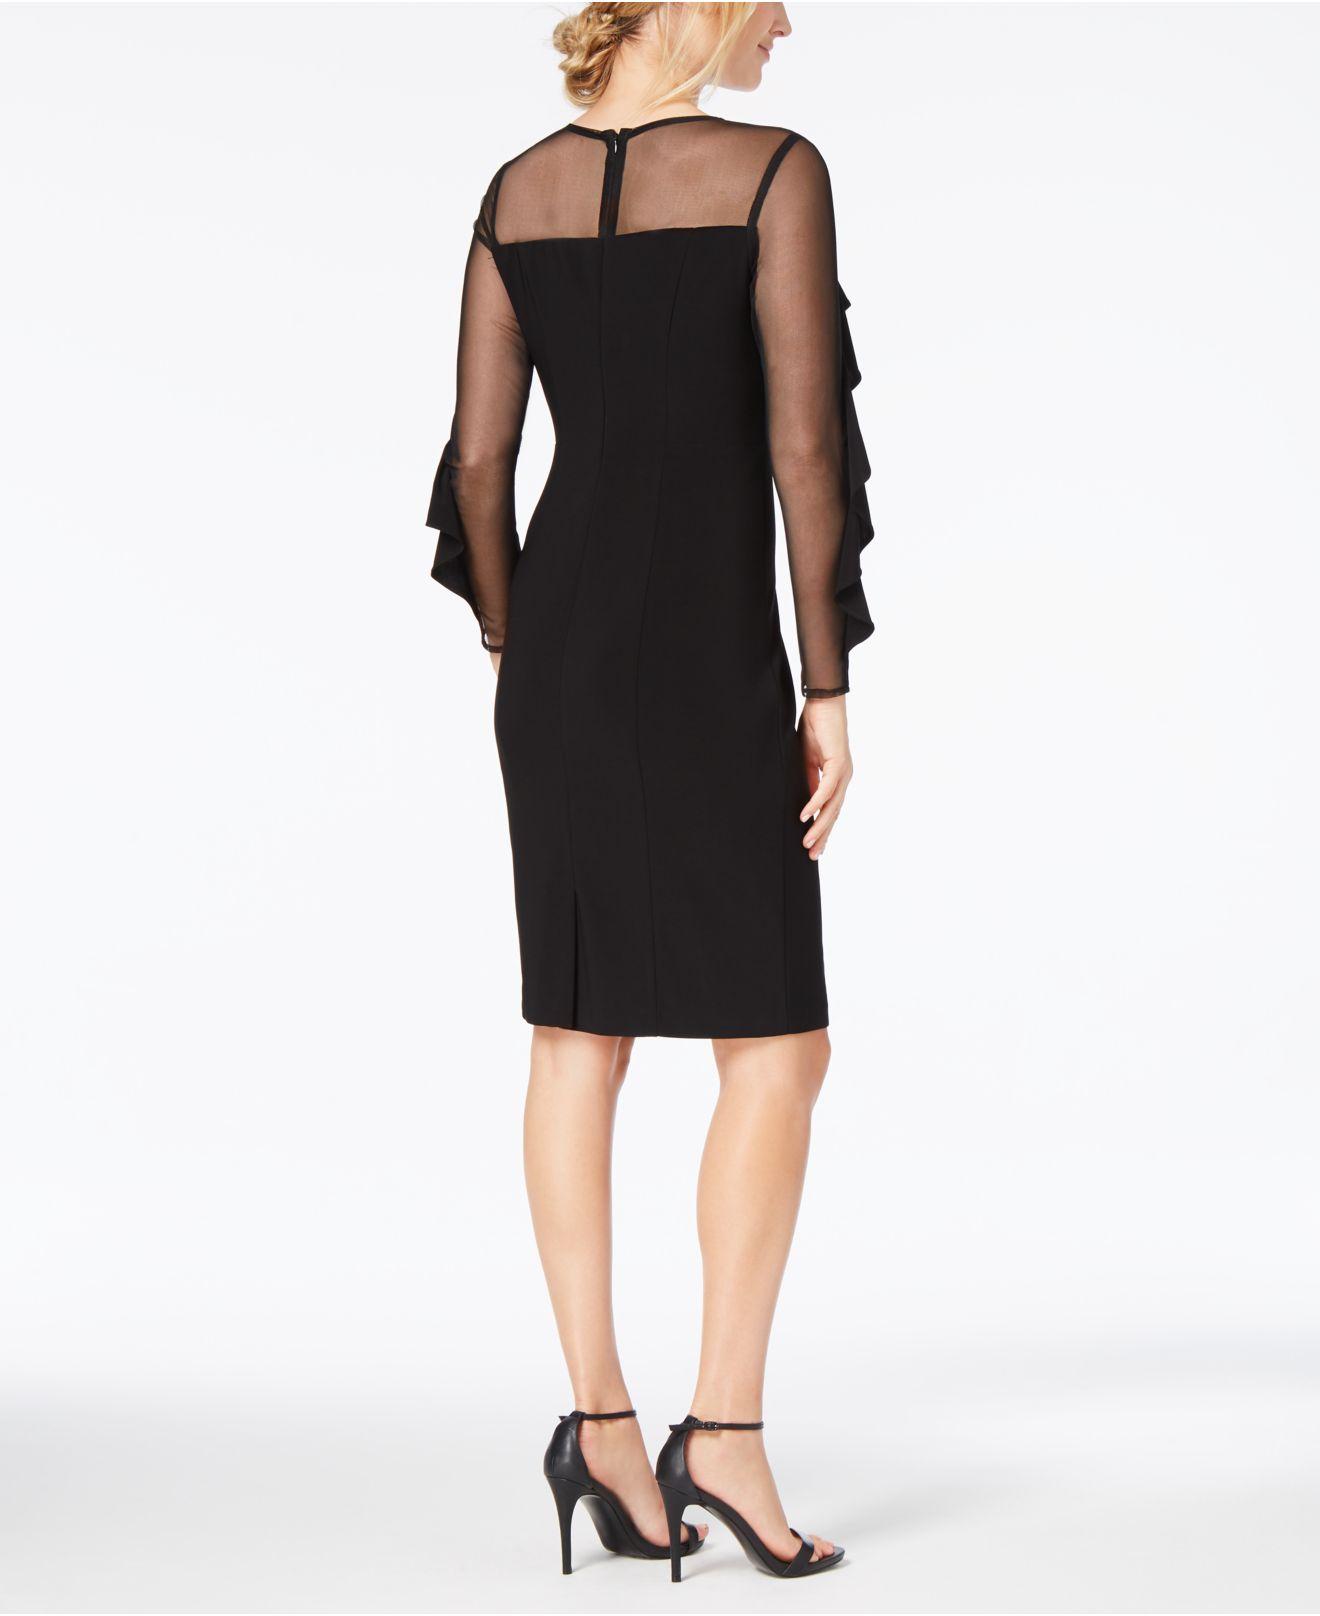 R & M Richards Synthetic Petite Illusion-sleeve Dress in Black - Lyst